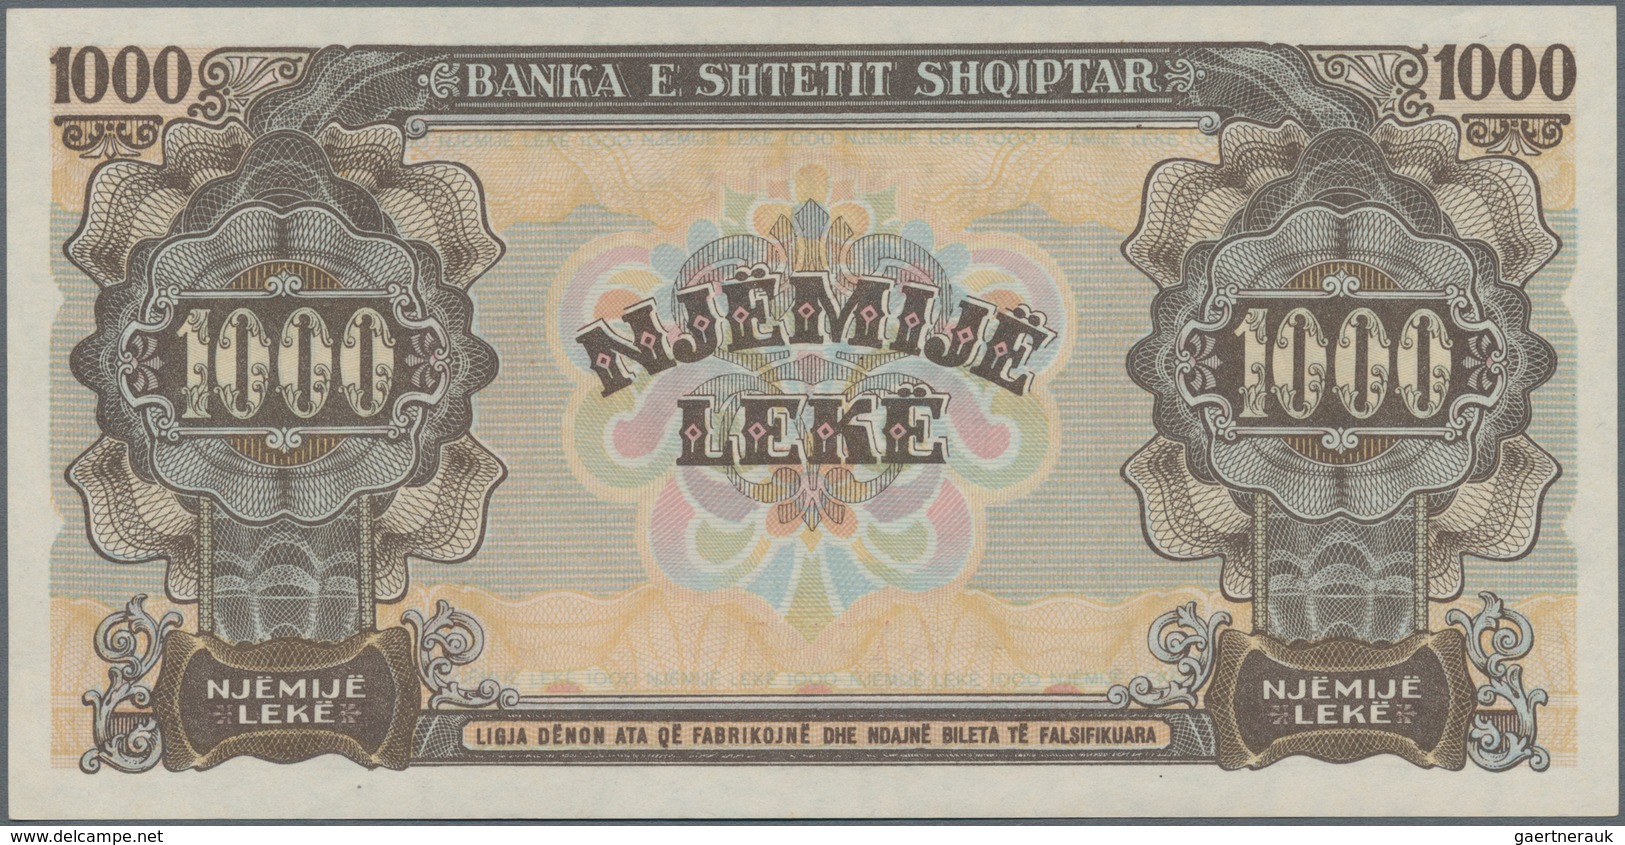 Albania / Albanien: 1947 "Soldier" Lek Issue with 10, 50, 100, 500 and 1000 Lek, P.19-23 in UNC cond